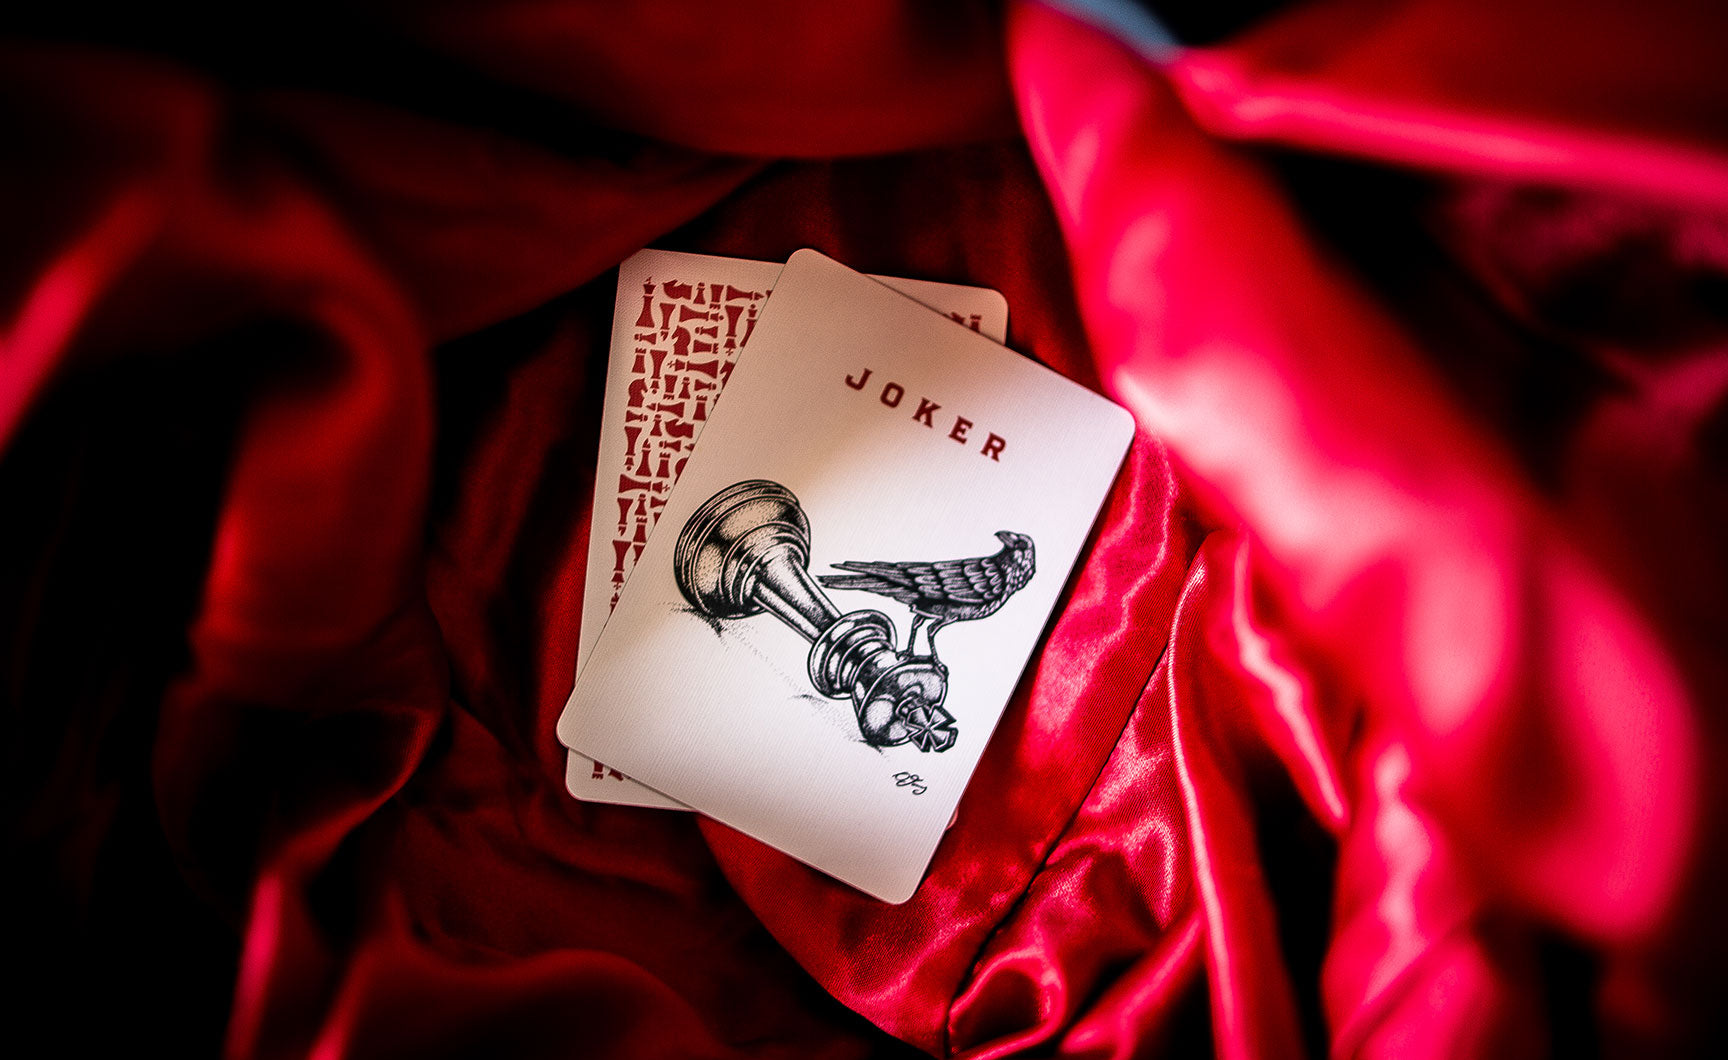 Red Knights by USPCC Crushed | Ellusionist